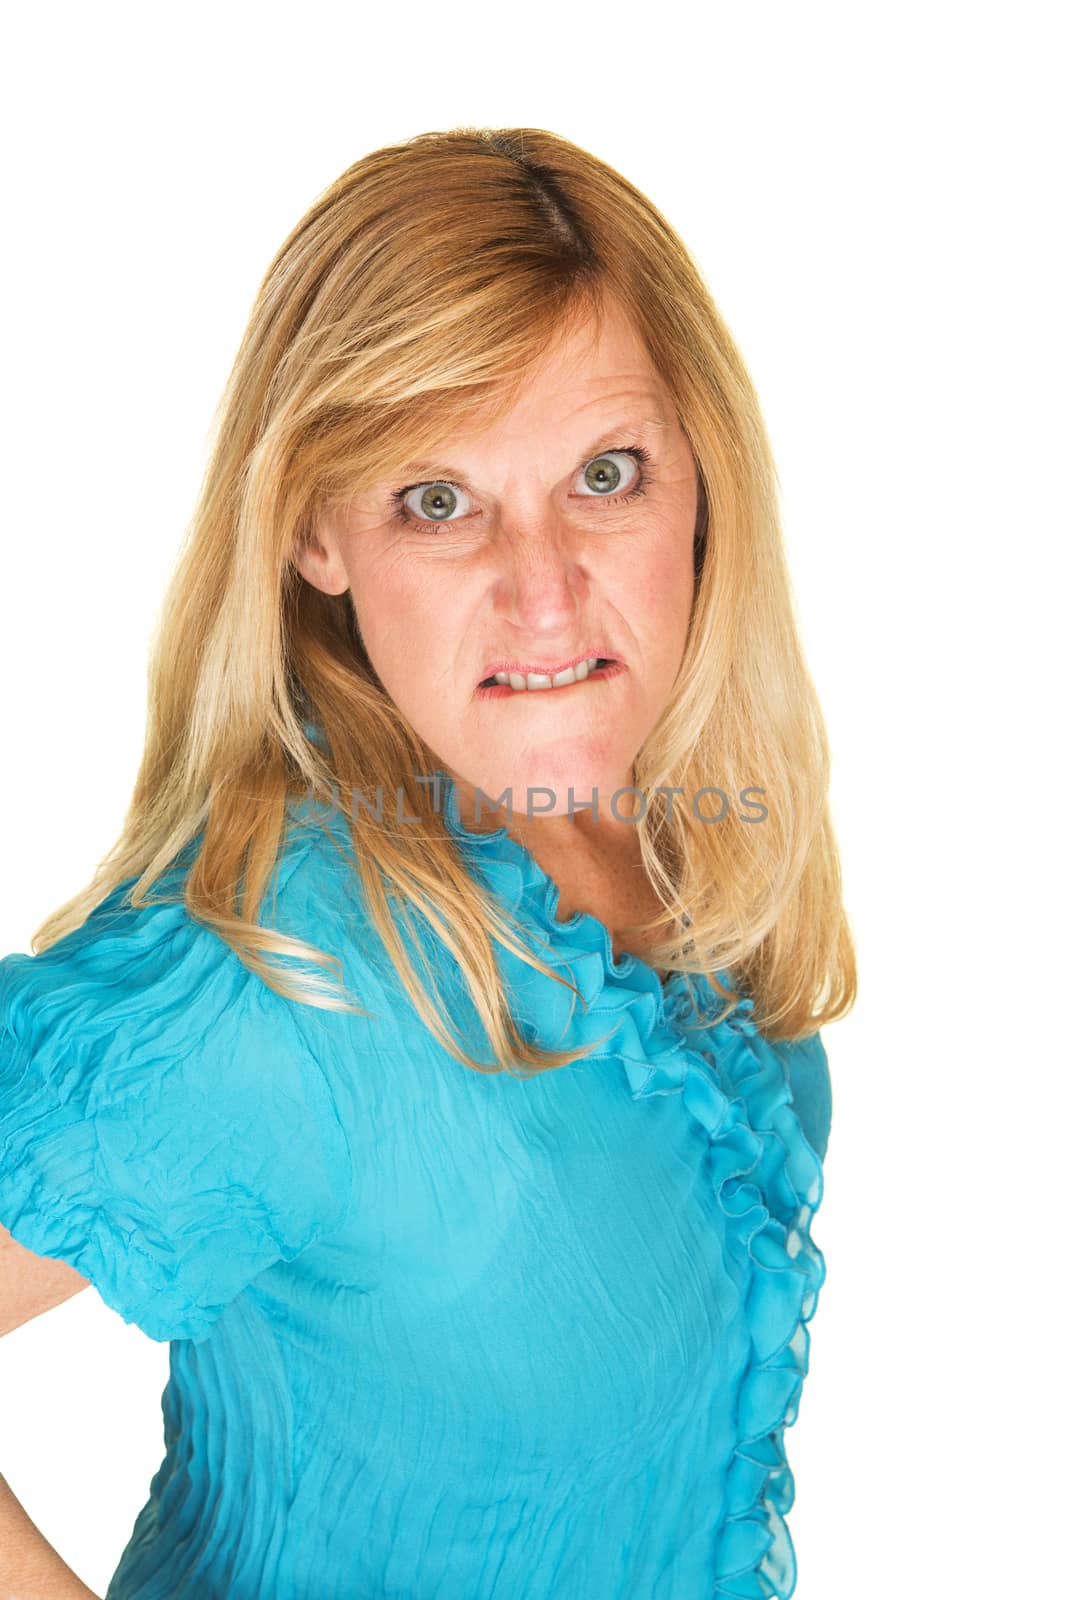 Furious European woman in biting lips over white background